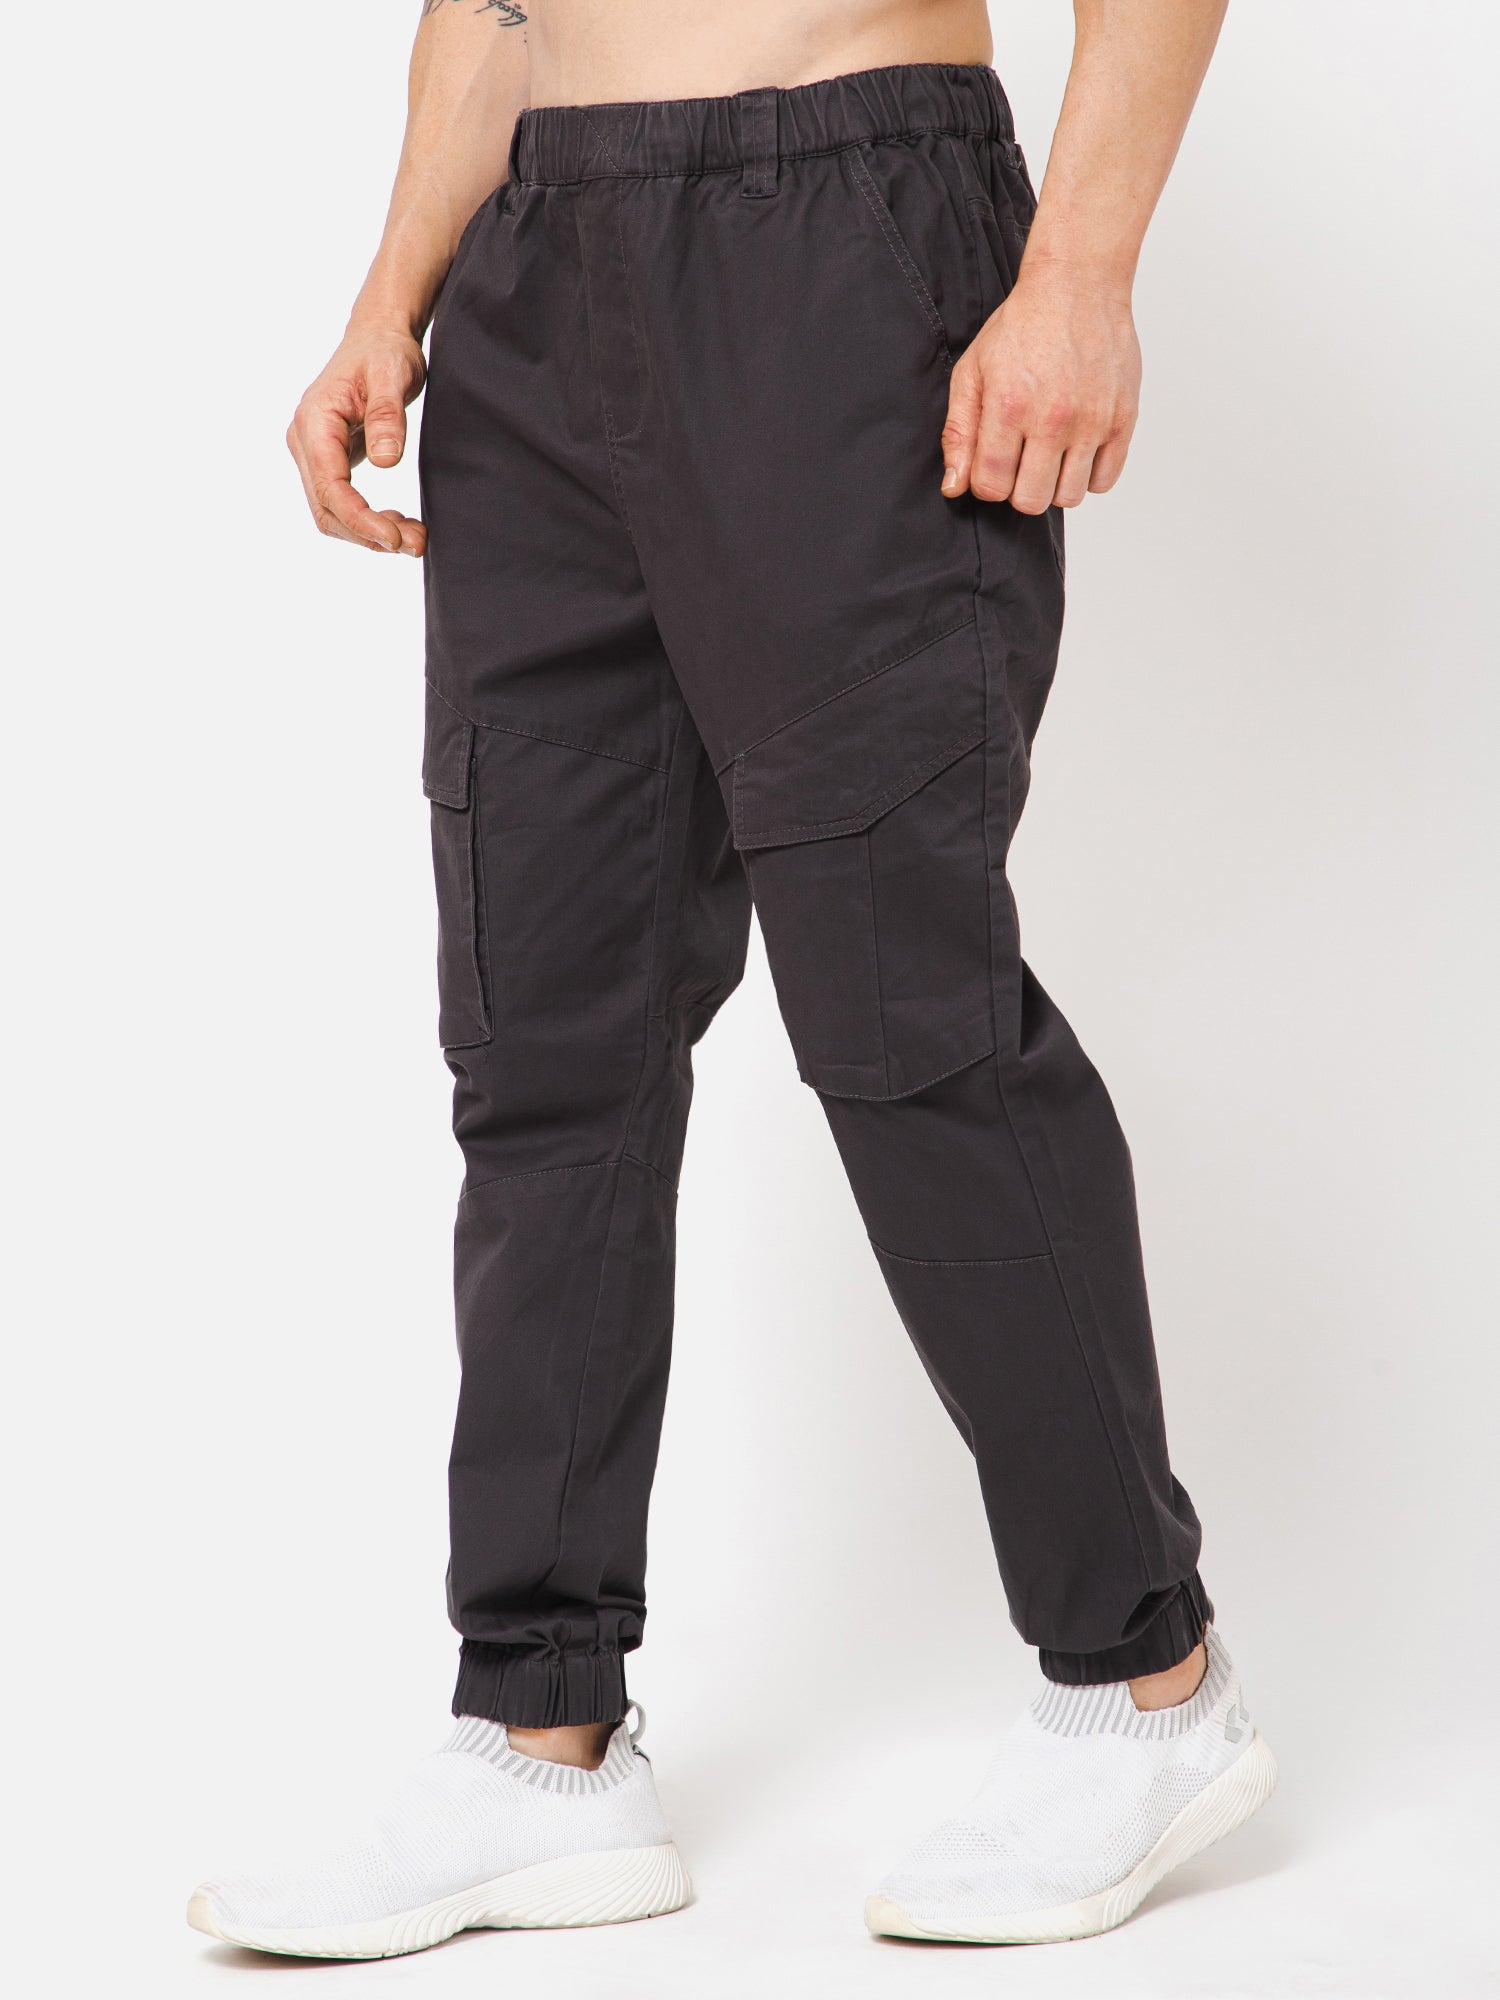 Sapper Cargos : Buy Sapper Men Casual Cargo Pants With 8 Pockets - Light  Green Online | Nykaa Fashion